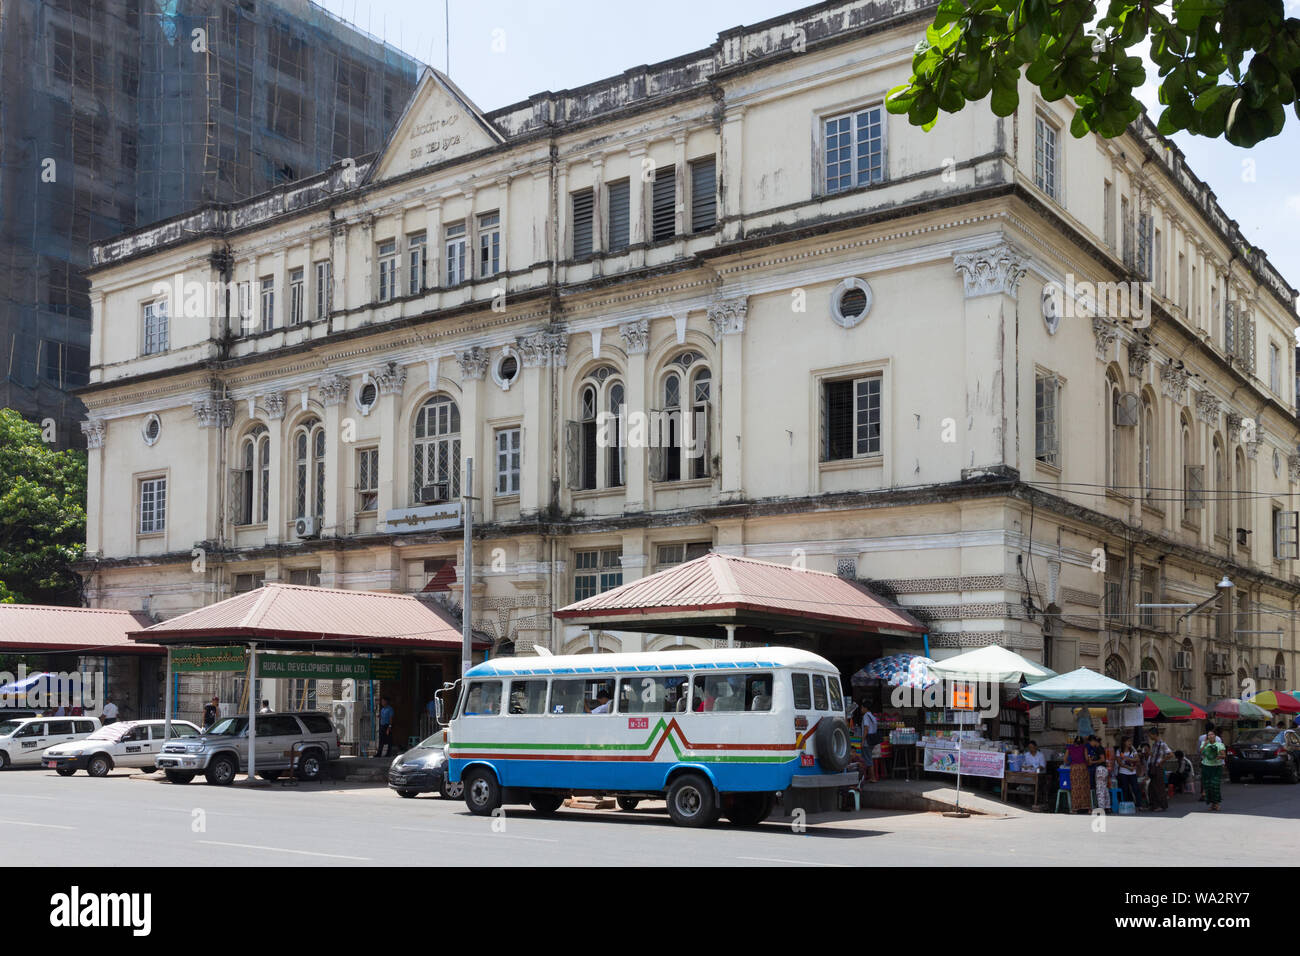 YANGON,MYANMAR May 8th 2014: Colonial architecture. Attempts are now being made to restore many of Yangons colonial architecture buildings. Stock Photo